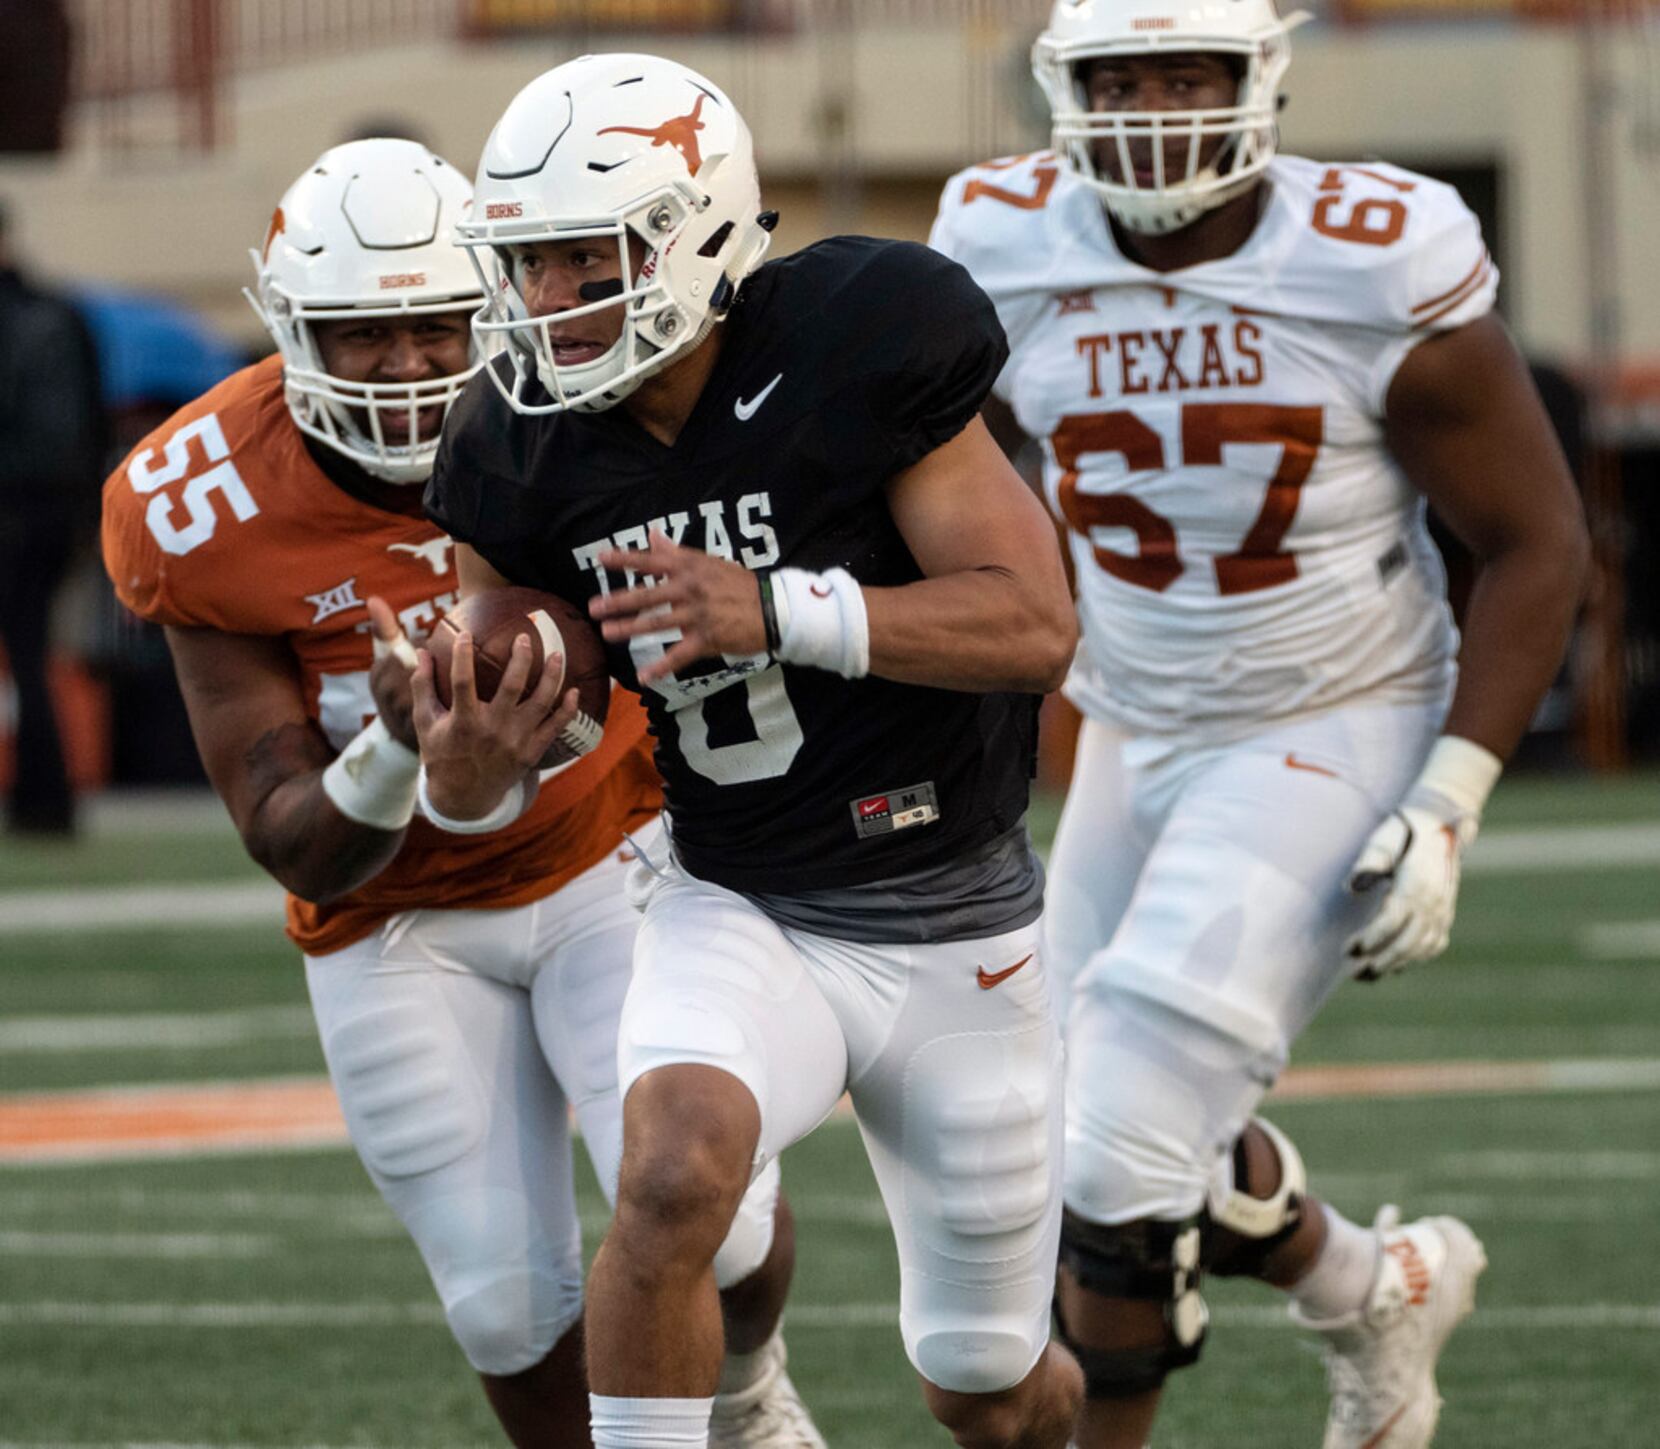 5 Texas position battles to watch heading into fall camp: Ehlinger or  Buechele as Longhorns' starting QB?